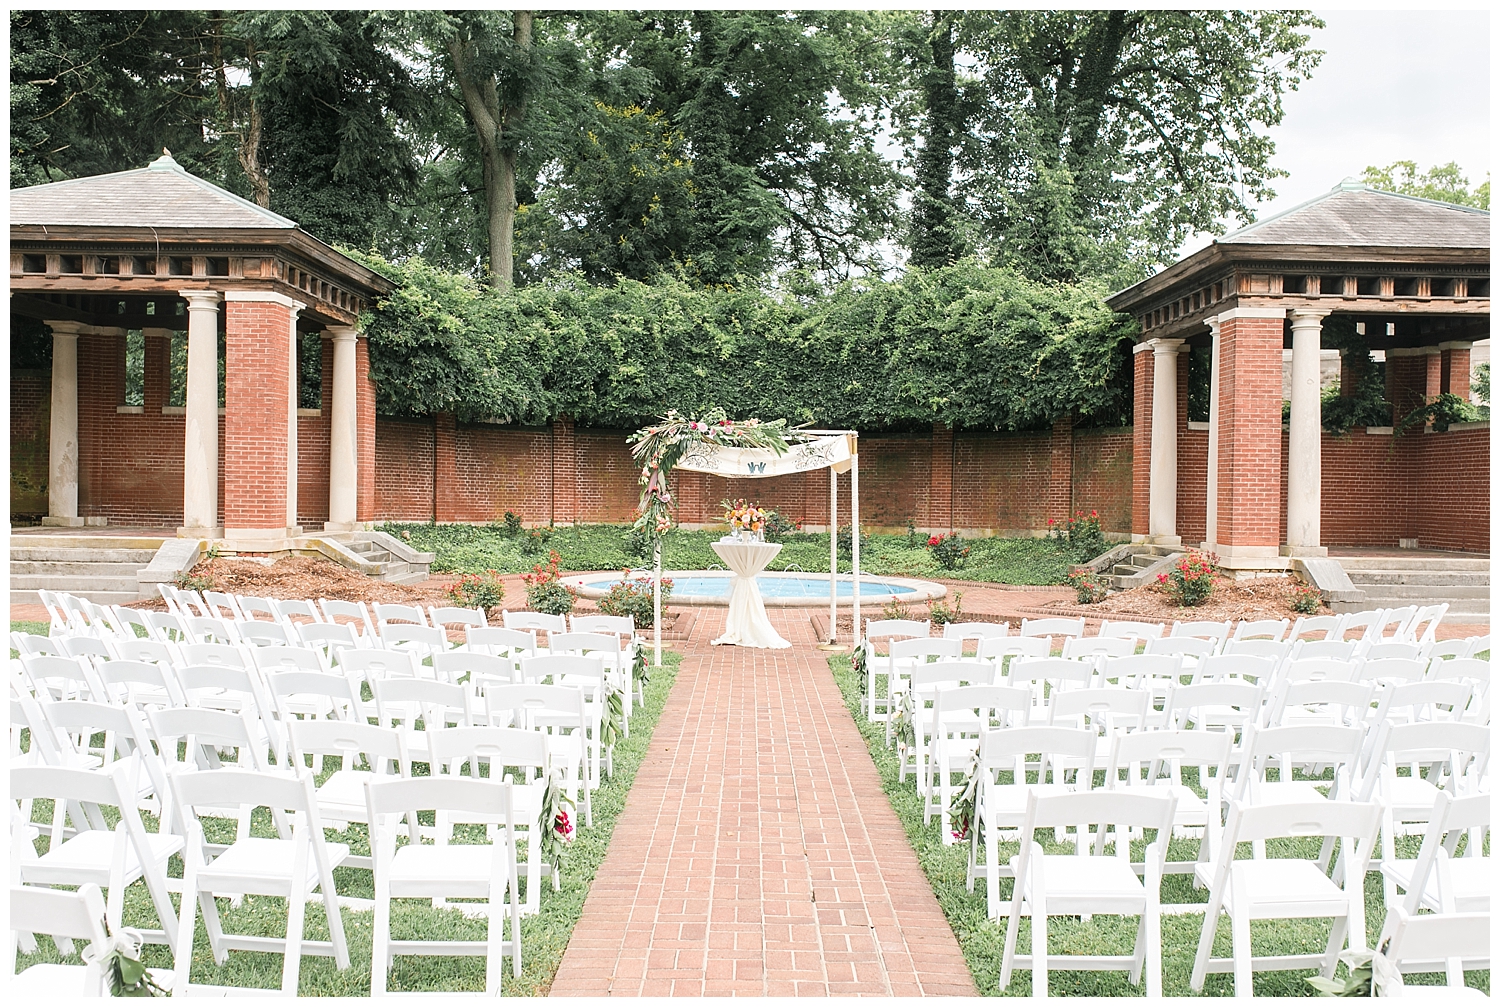  The bride and groom in a Jewish ceremony typically recite their vows under the chuppah. The chuppah typically consists of four corners and roof to symbolize the home they are building together. 